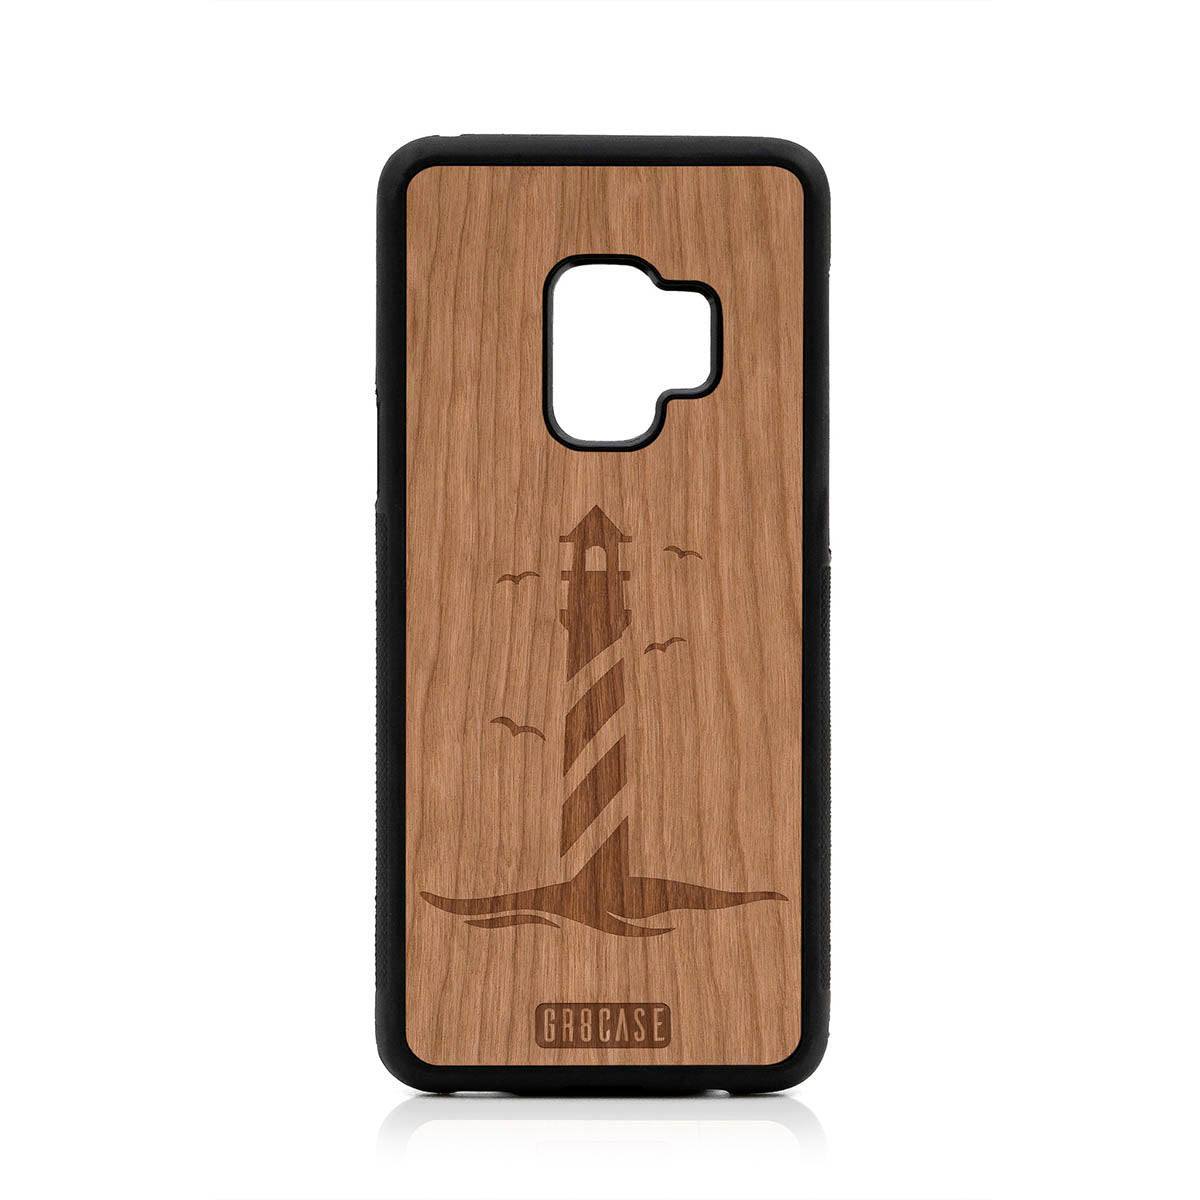 Lighthouse Design Wood Case For Samsung Galaxy S9